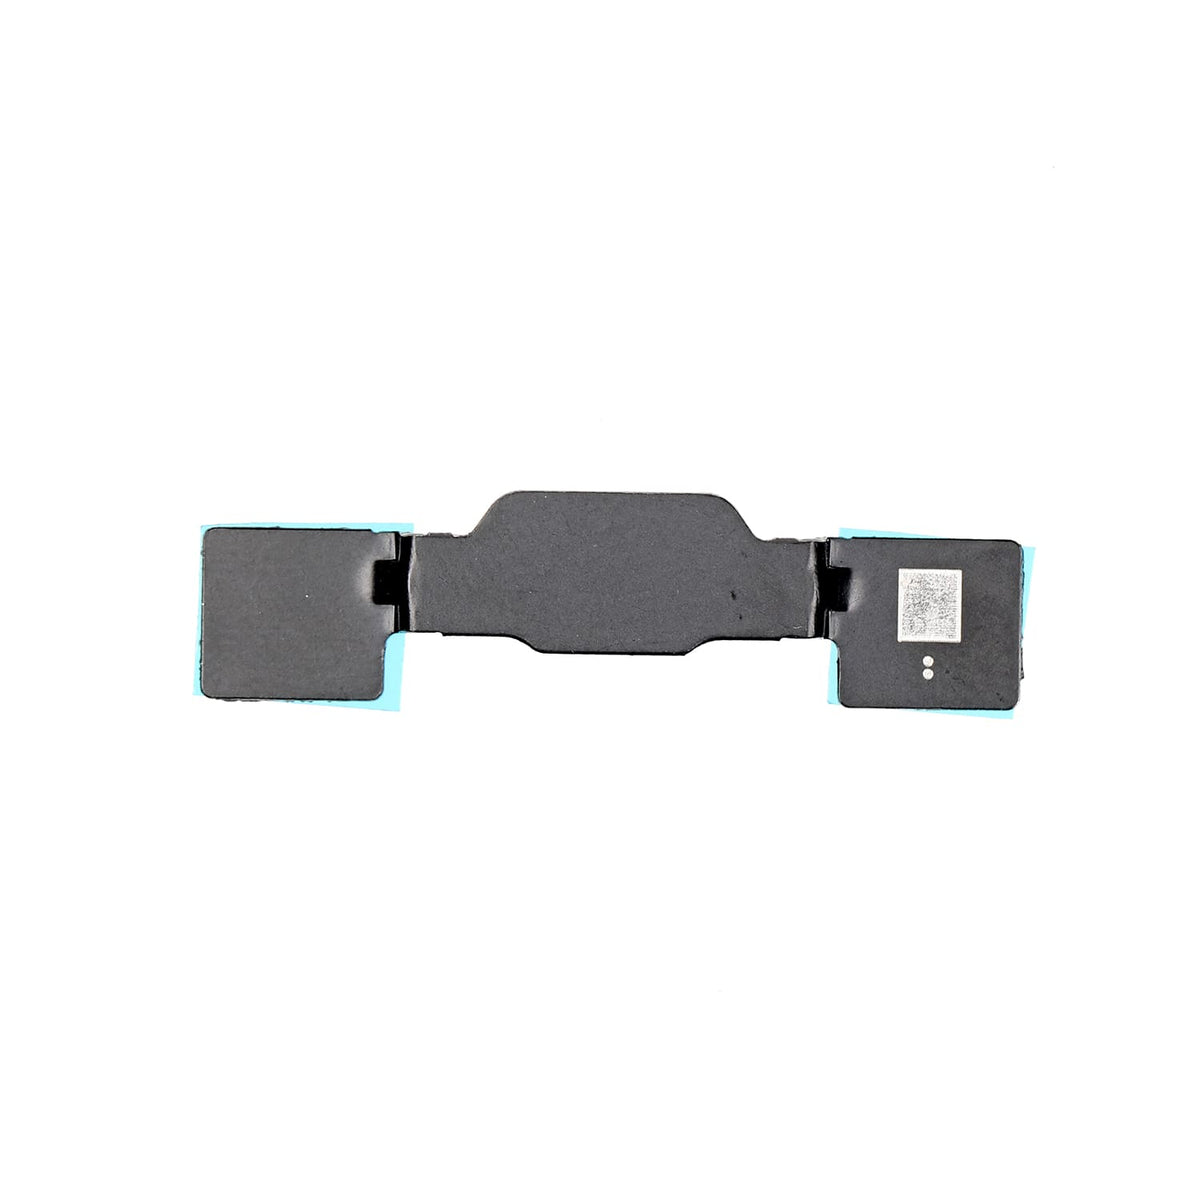 HOME BUTTON METAL BRACKET FOR IPAD 5/6/7/8/9